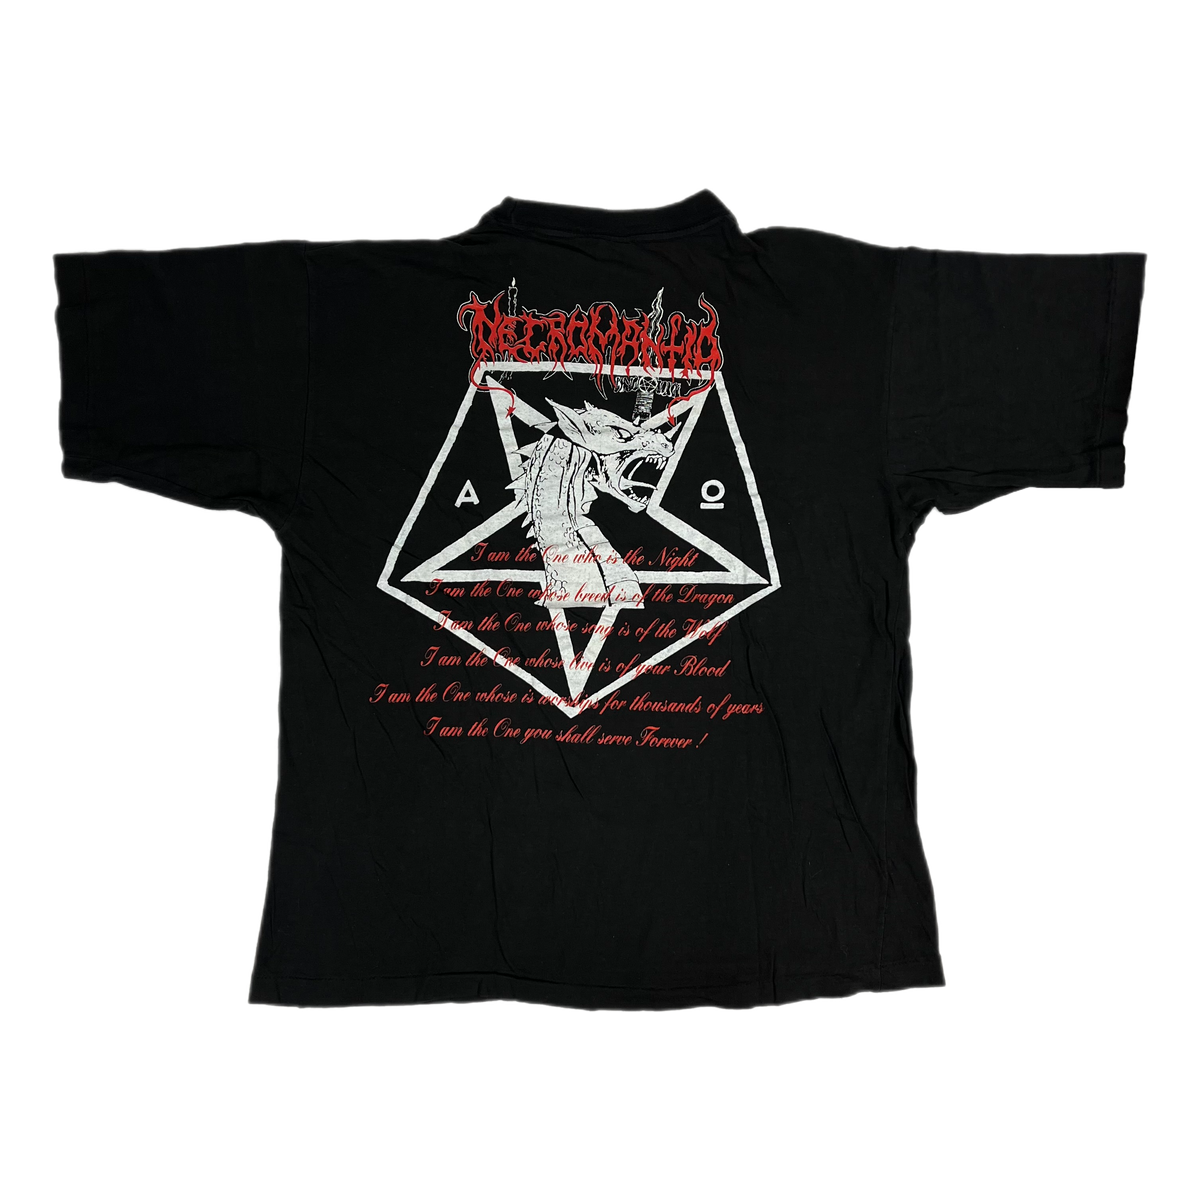 Vintage Necromantia &quot;Crossing The Fiery Path&quot; Osmose Productions T-Shirt